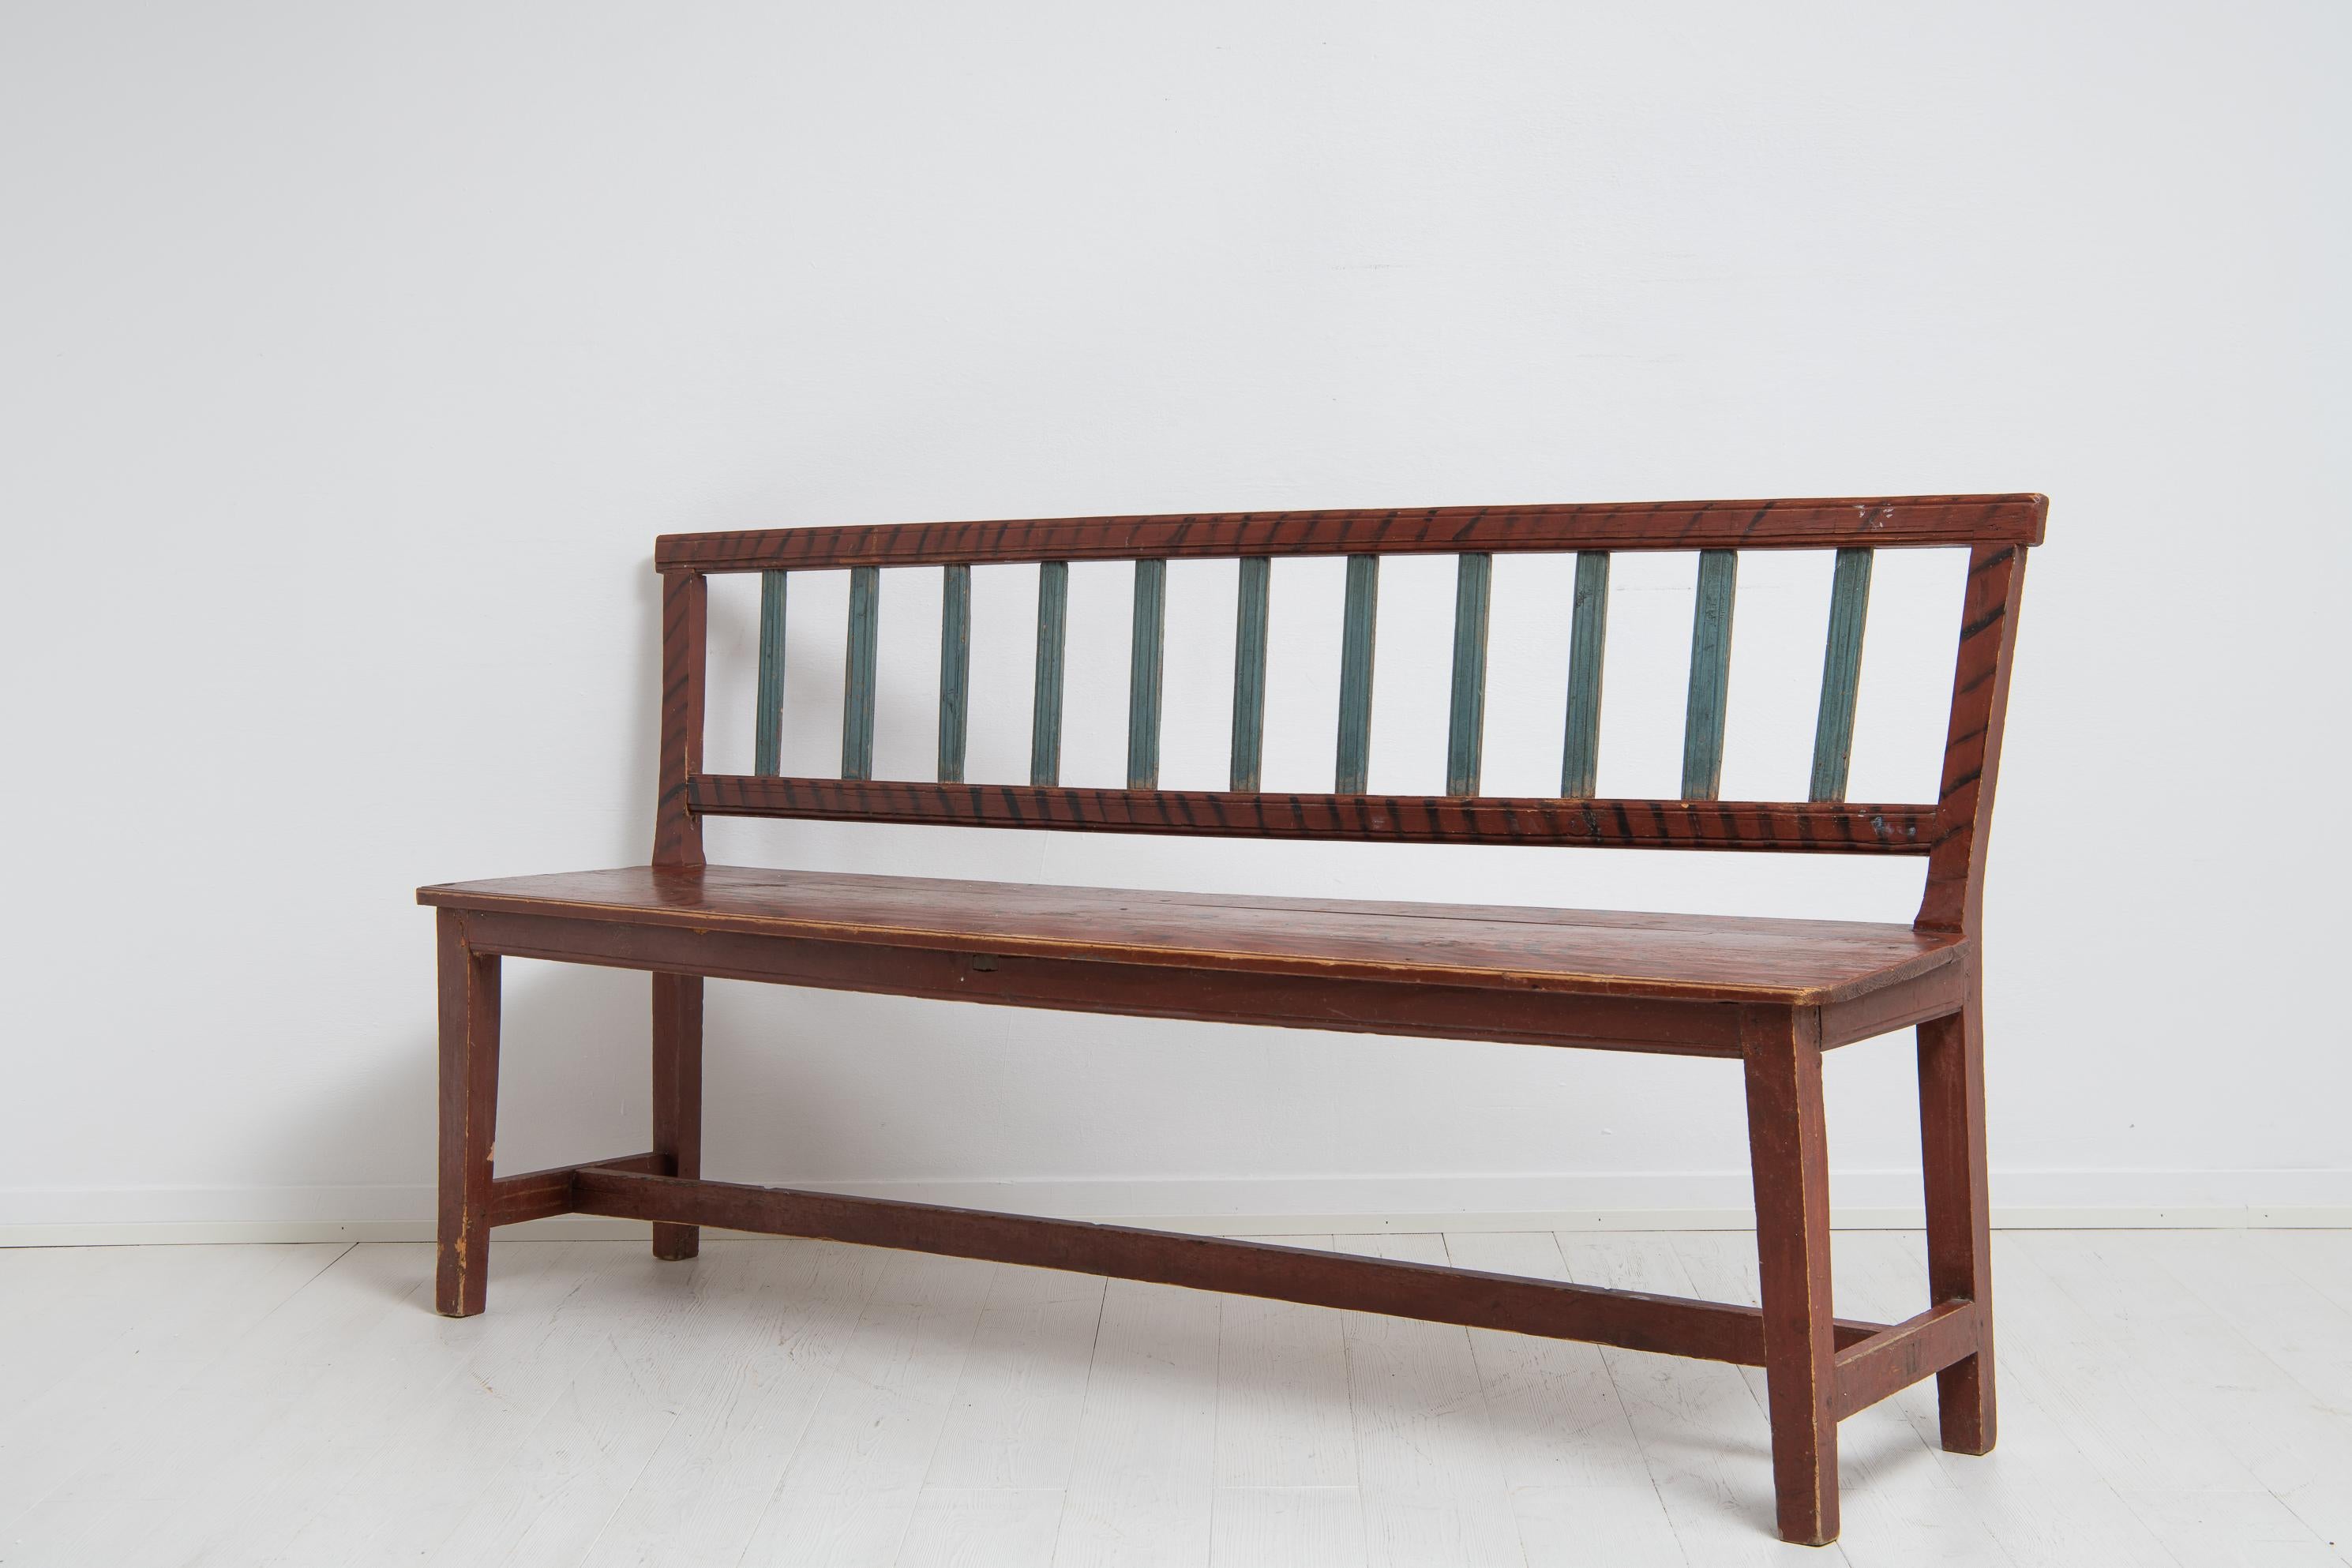 Early 19th Century Swedish Gustavian Folk Art Country Sofa or Bench In Good Condition For Sale In Kramfors, SE